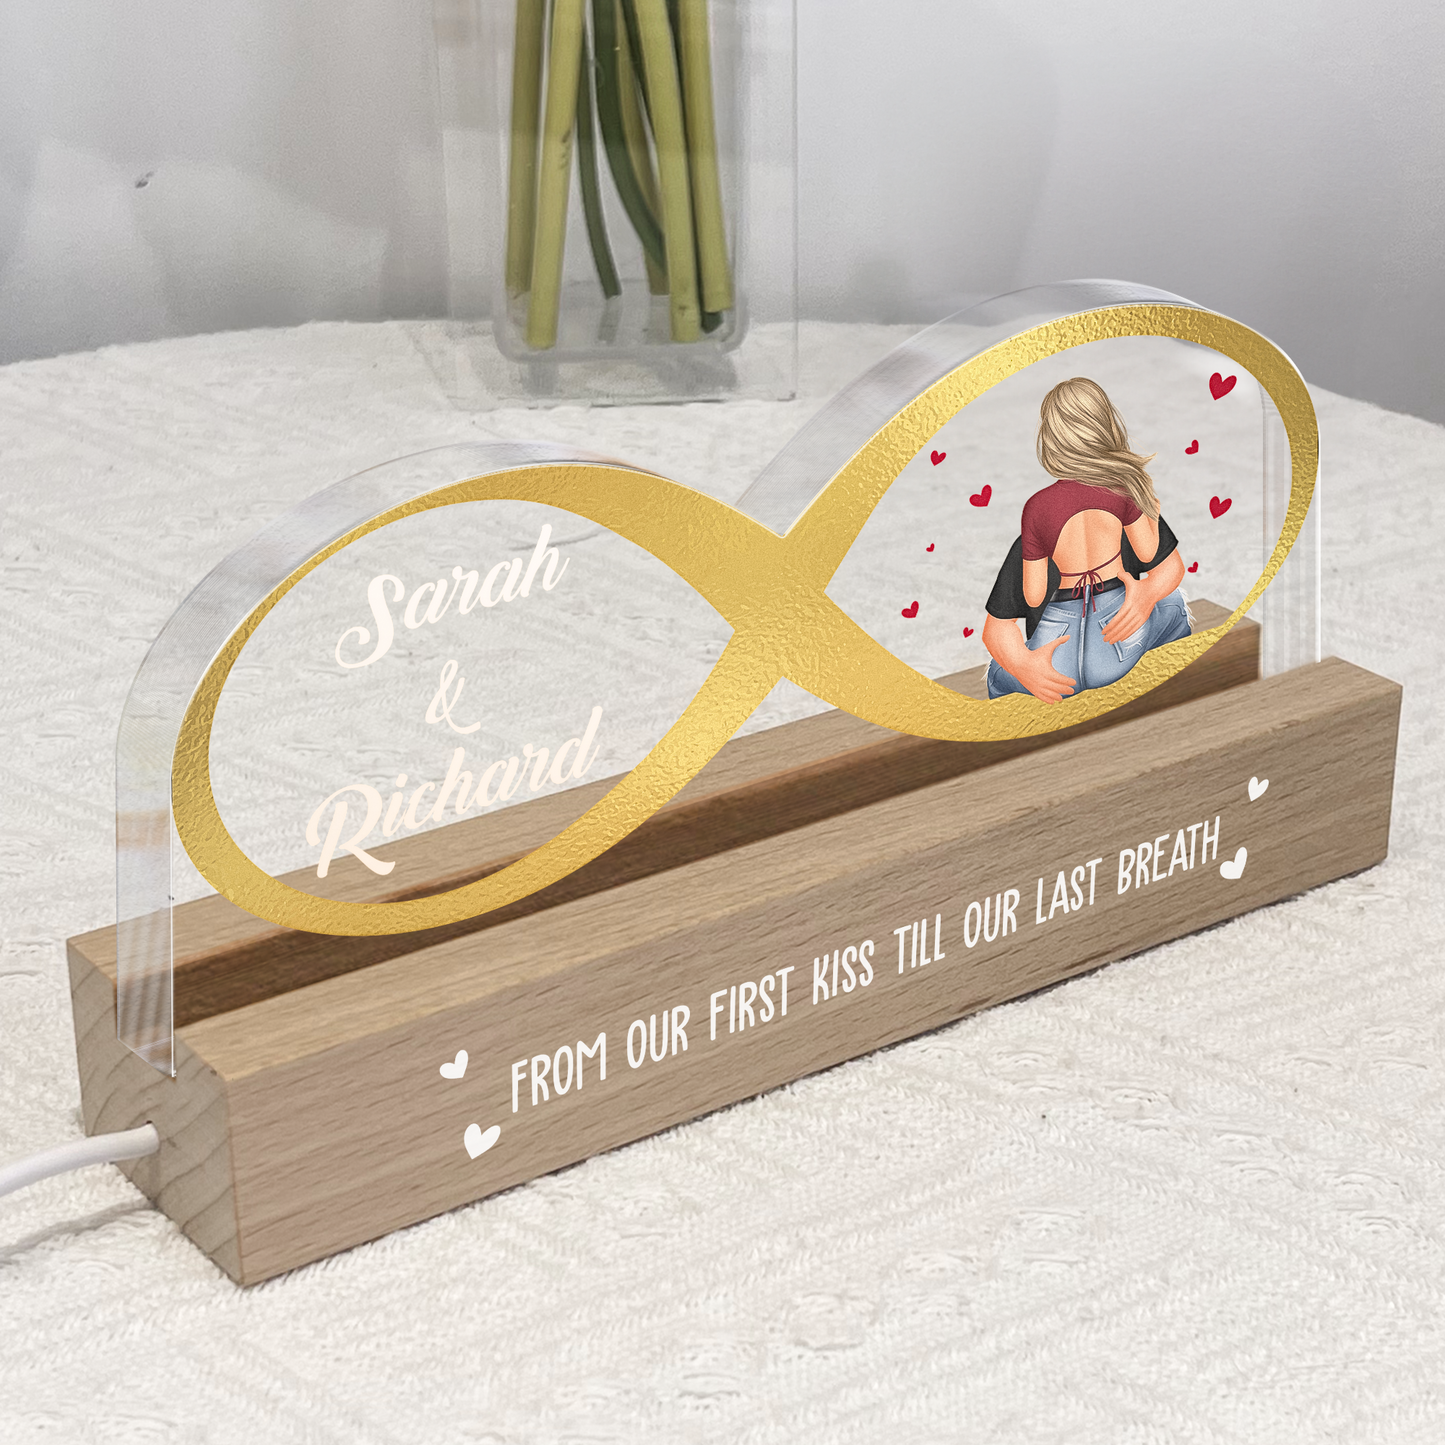 From Our First Kiss Till Our Last Breath - Personalized LED Night Light